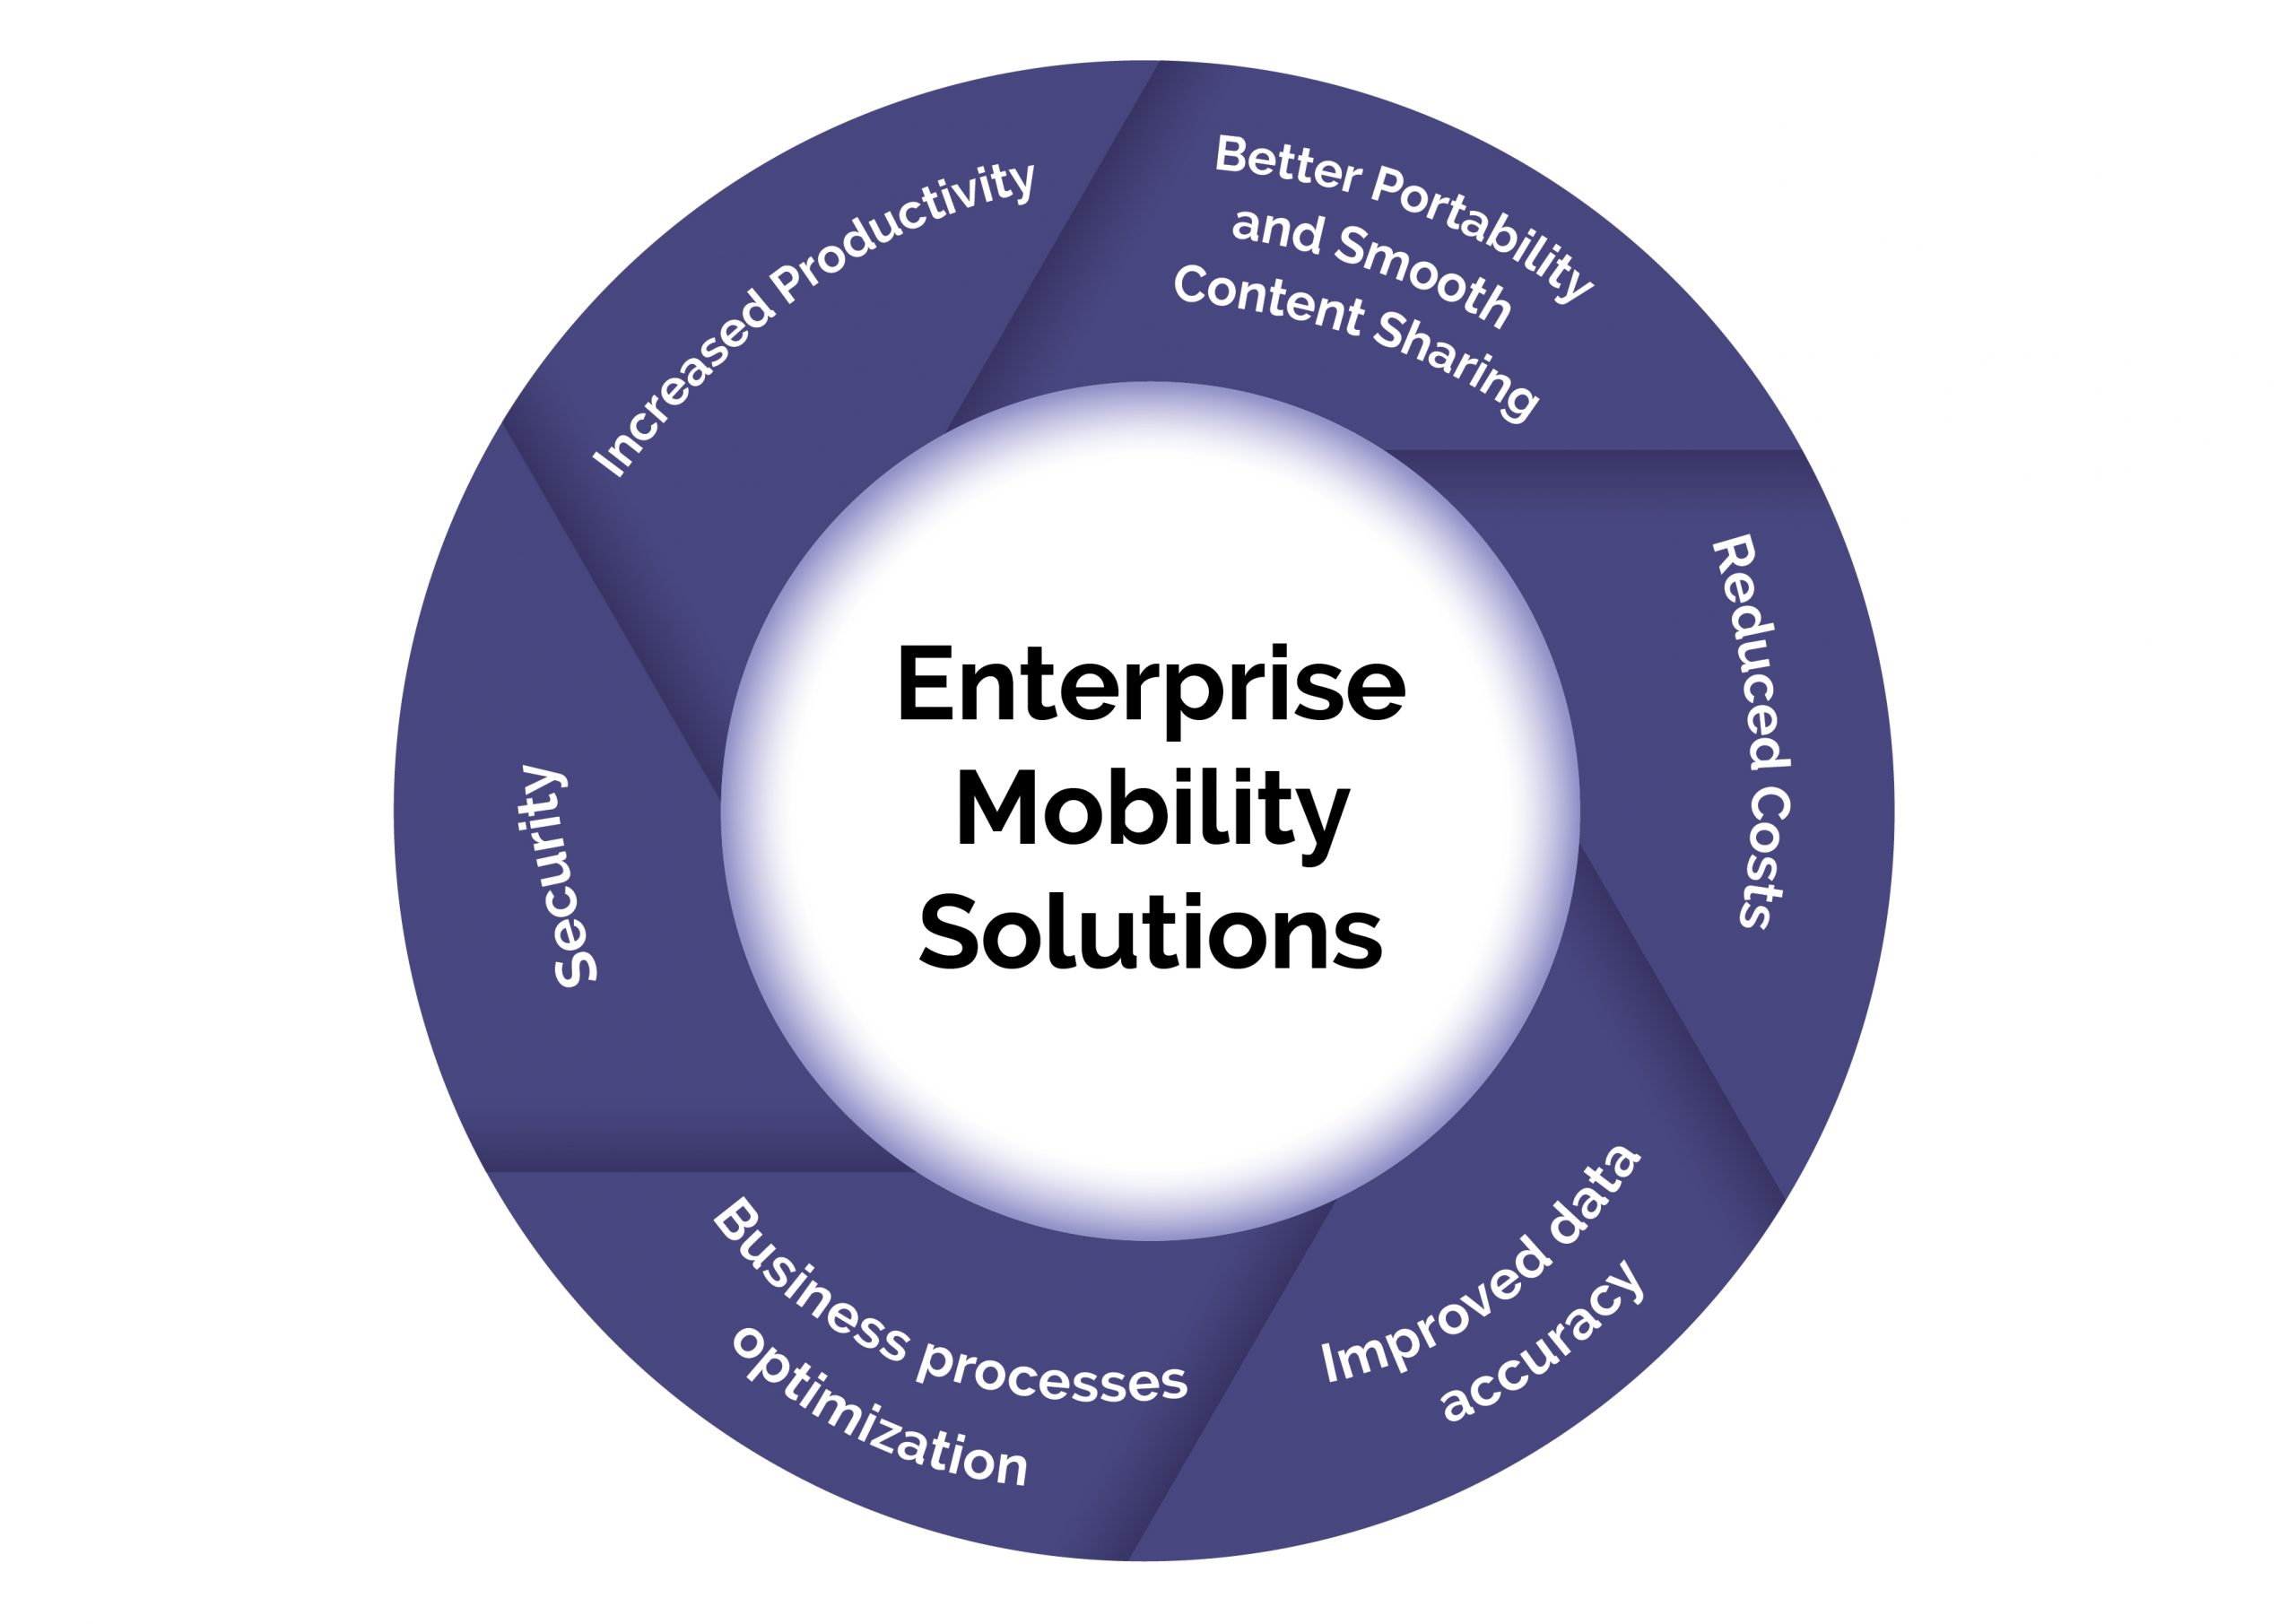 6 Benefits of Enterprise Mobility for Business